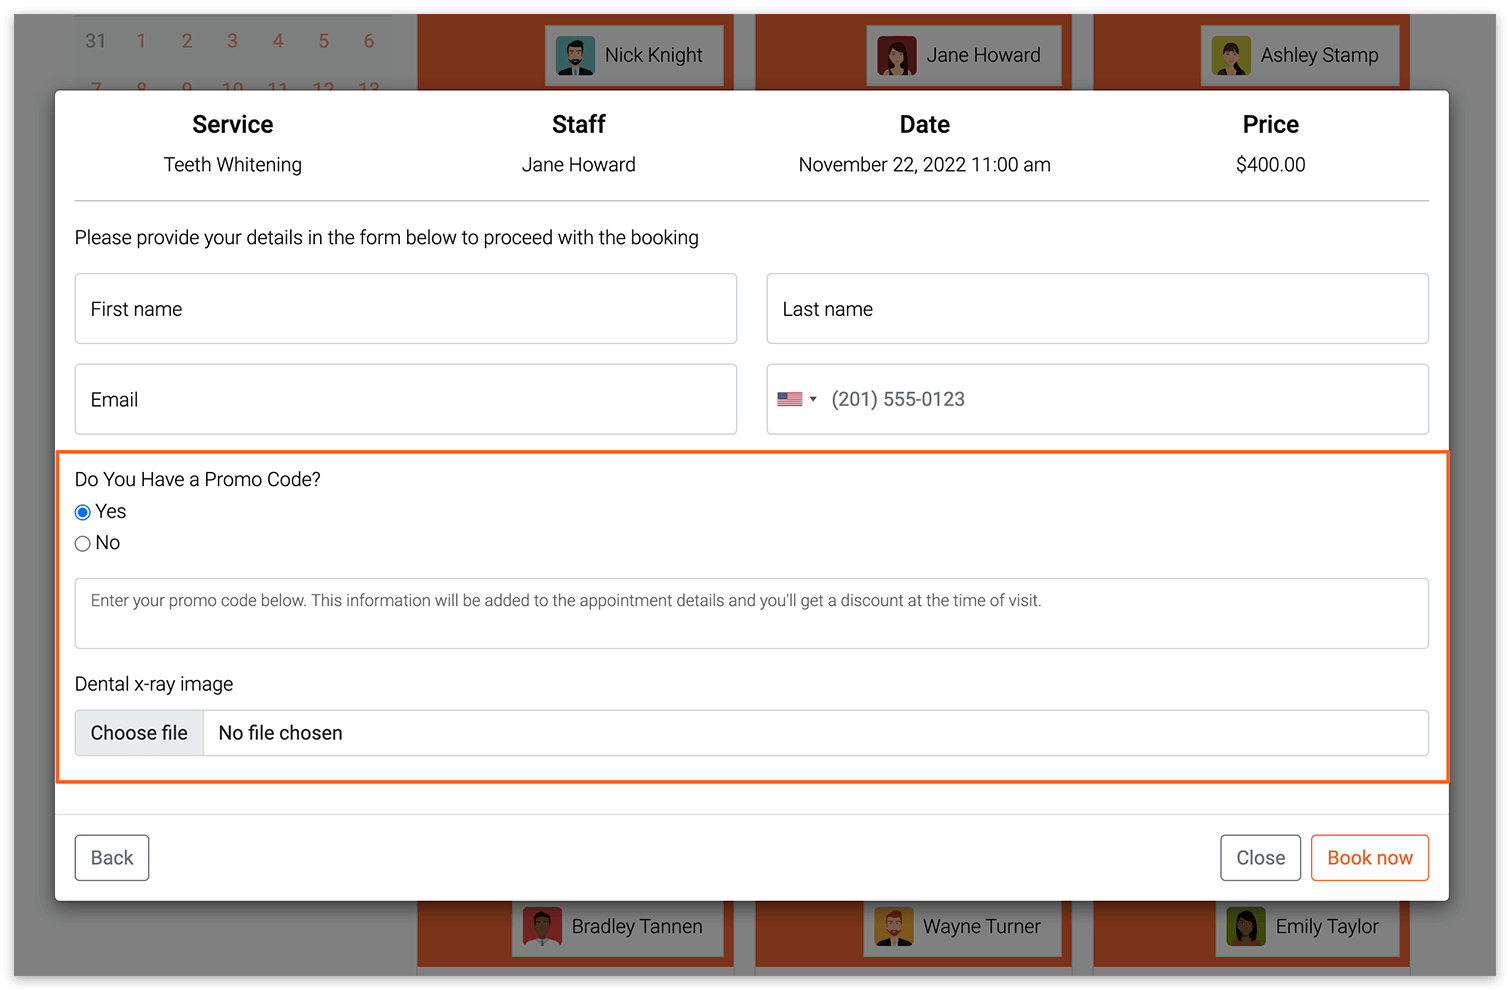 Custom Fields and Files in the new booking forms